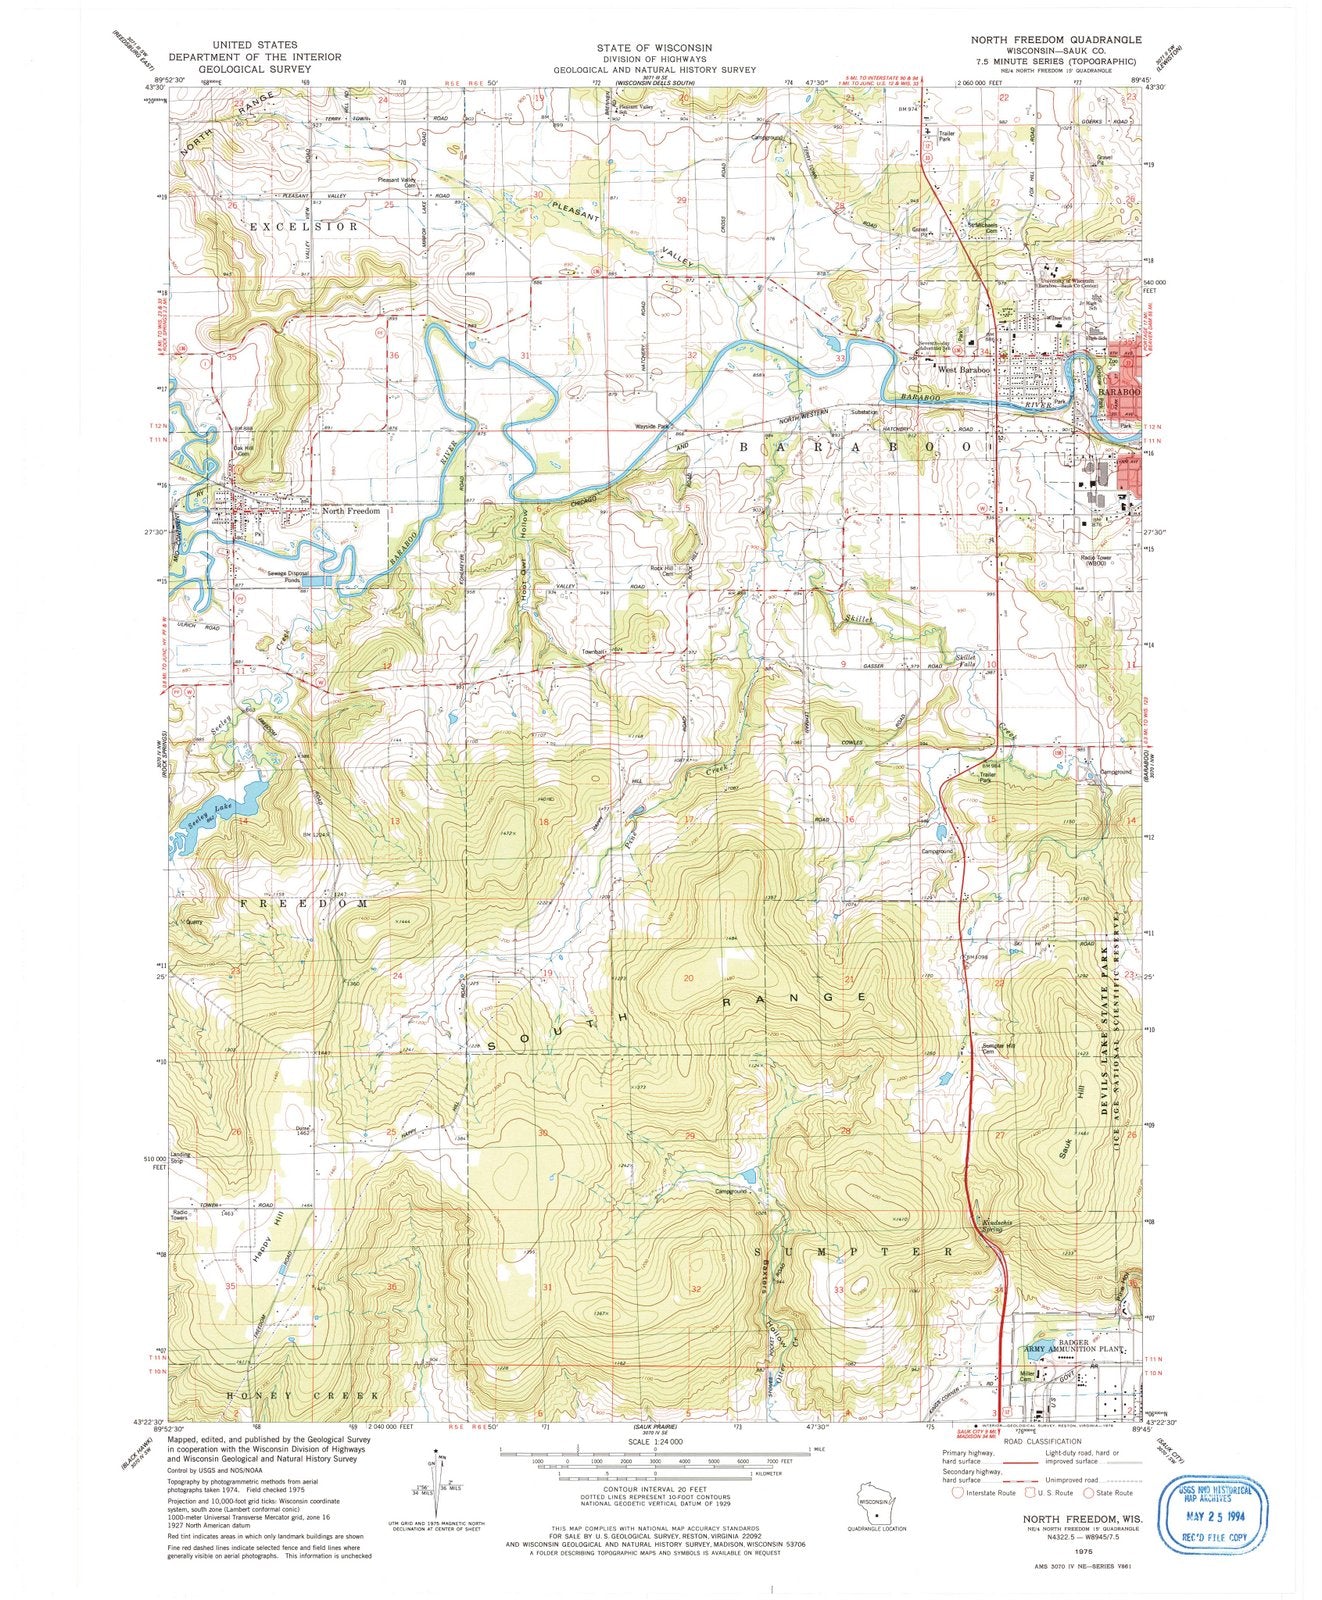 1975 North Freedom, WI - Wisconsin - USGS Topographic Map